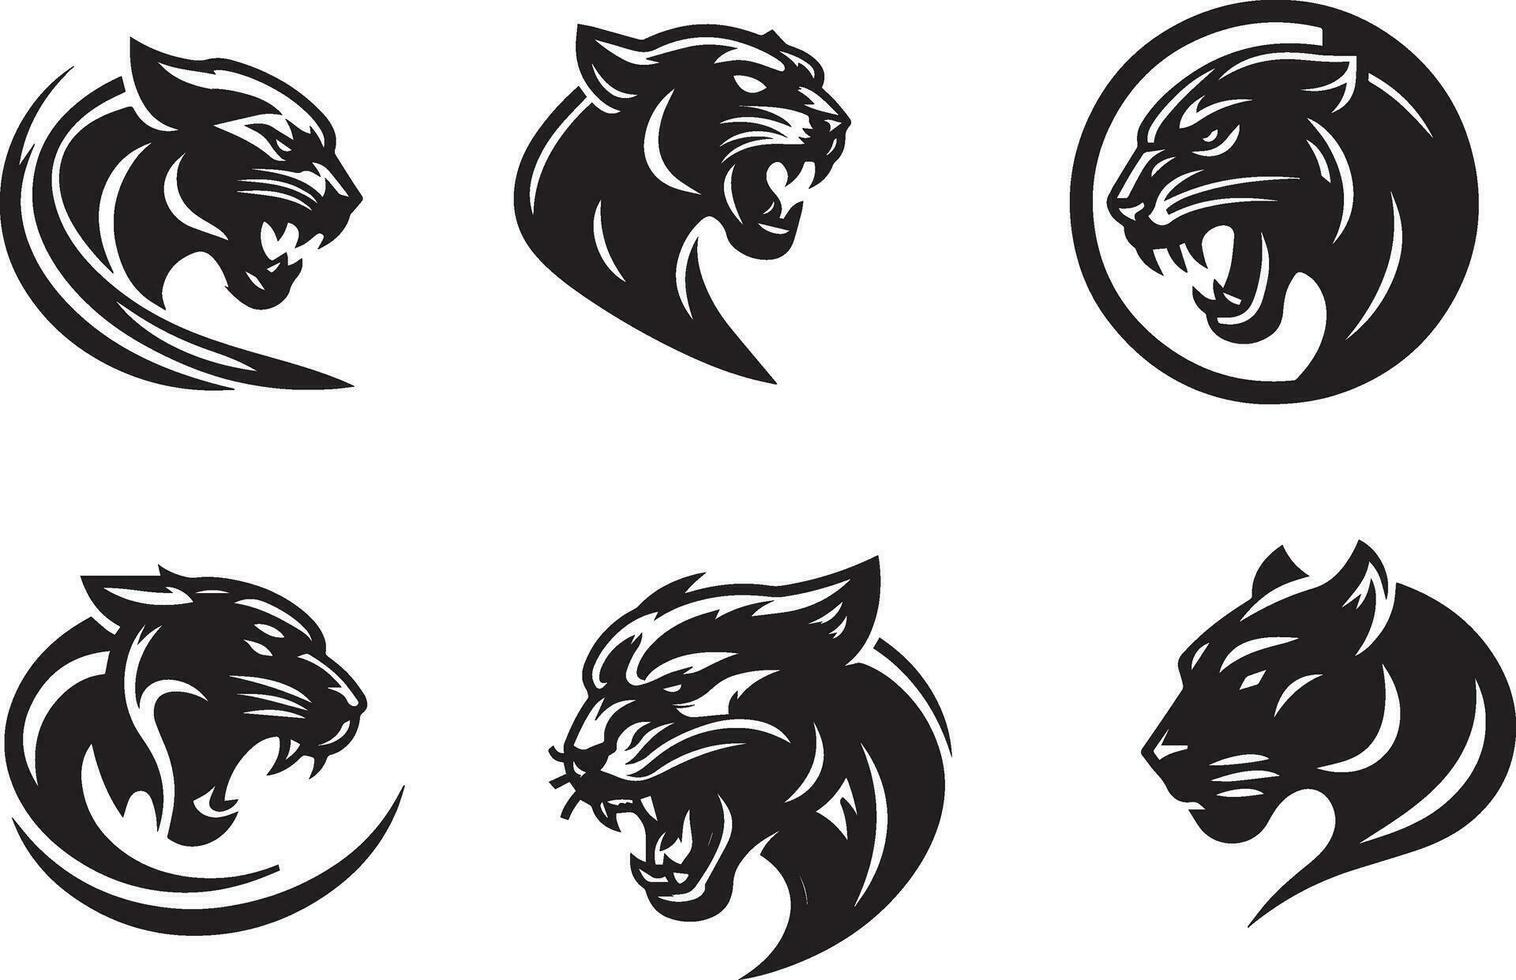 Panther logo icon vector illustration black color white background 6